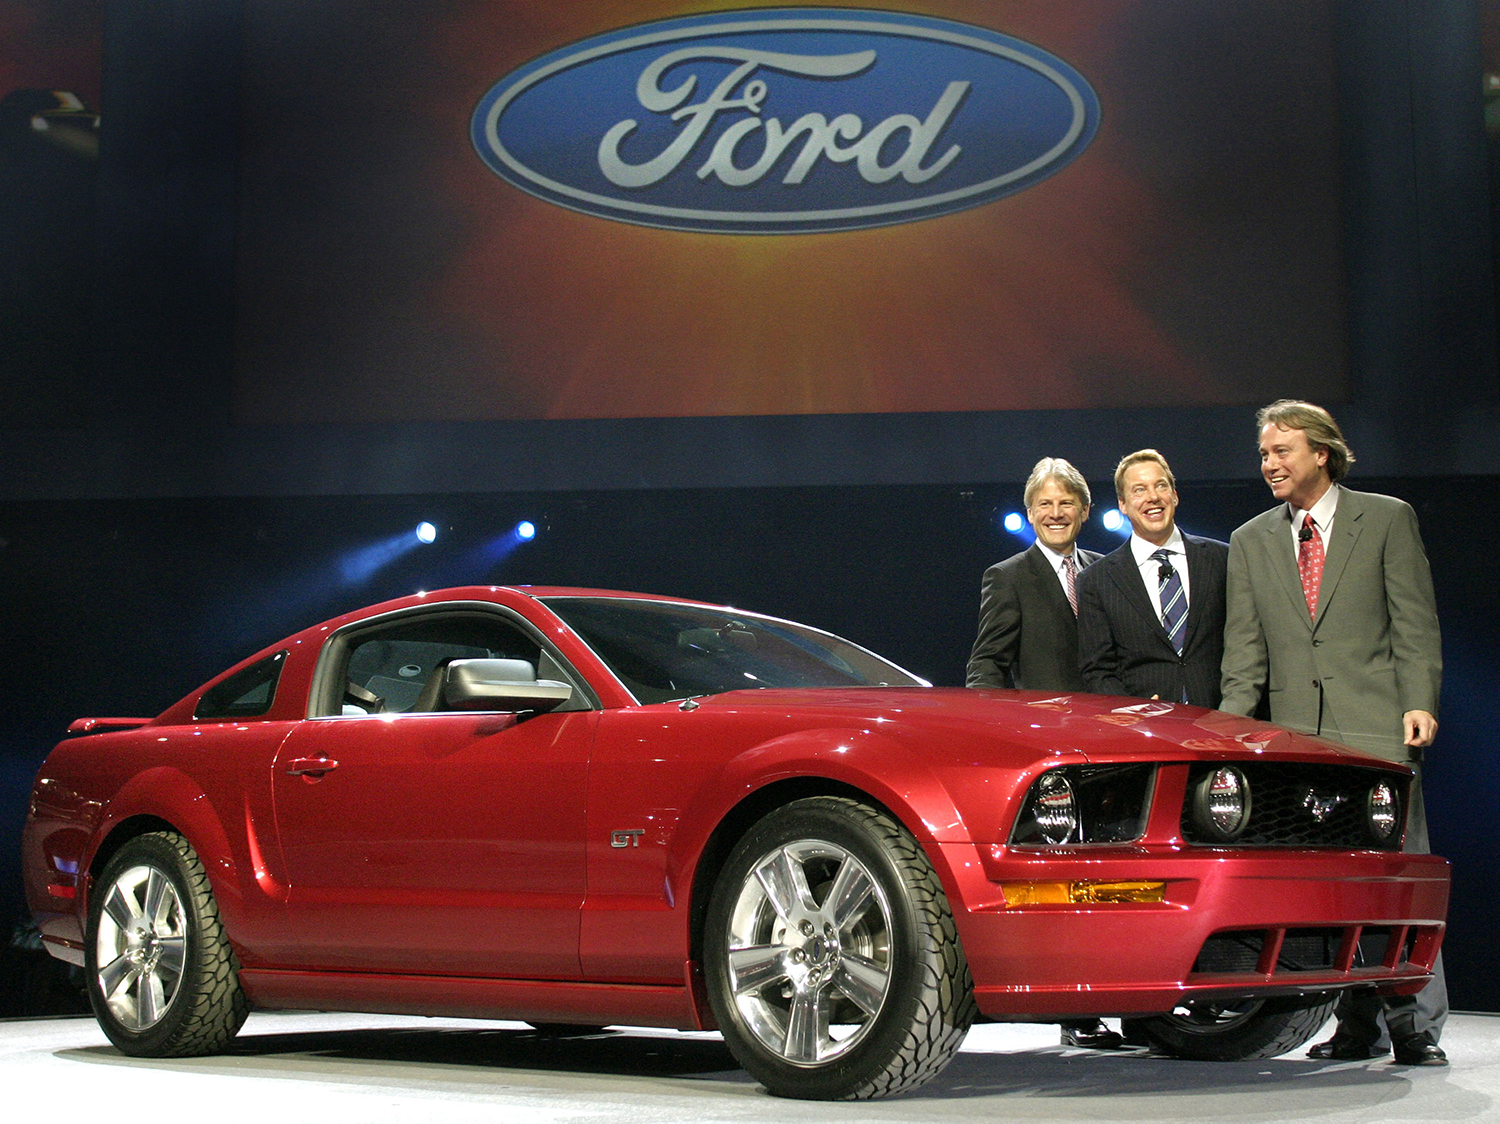 Phil Martens, Bill Ford and J Mays show off the new Ford Mustang in Detroit in 2004 at the North American International Auto Show